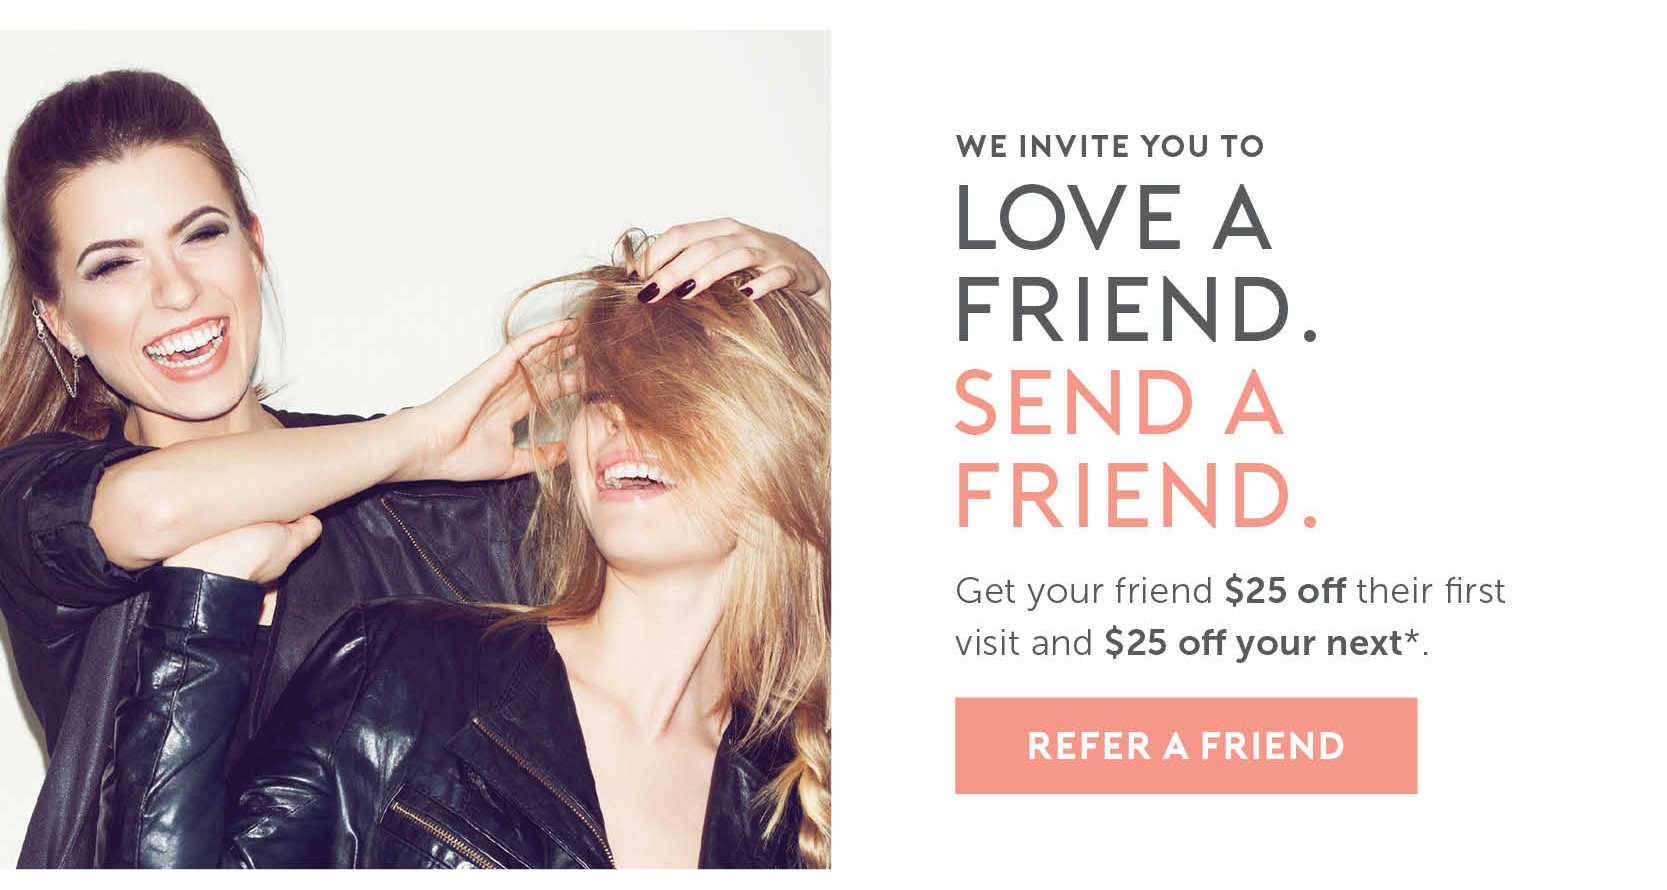 We invite you to love a friend, send a friend. Get your friend $25 off their first visit and $25 off your next. 